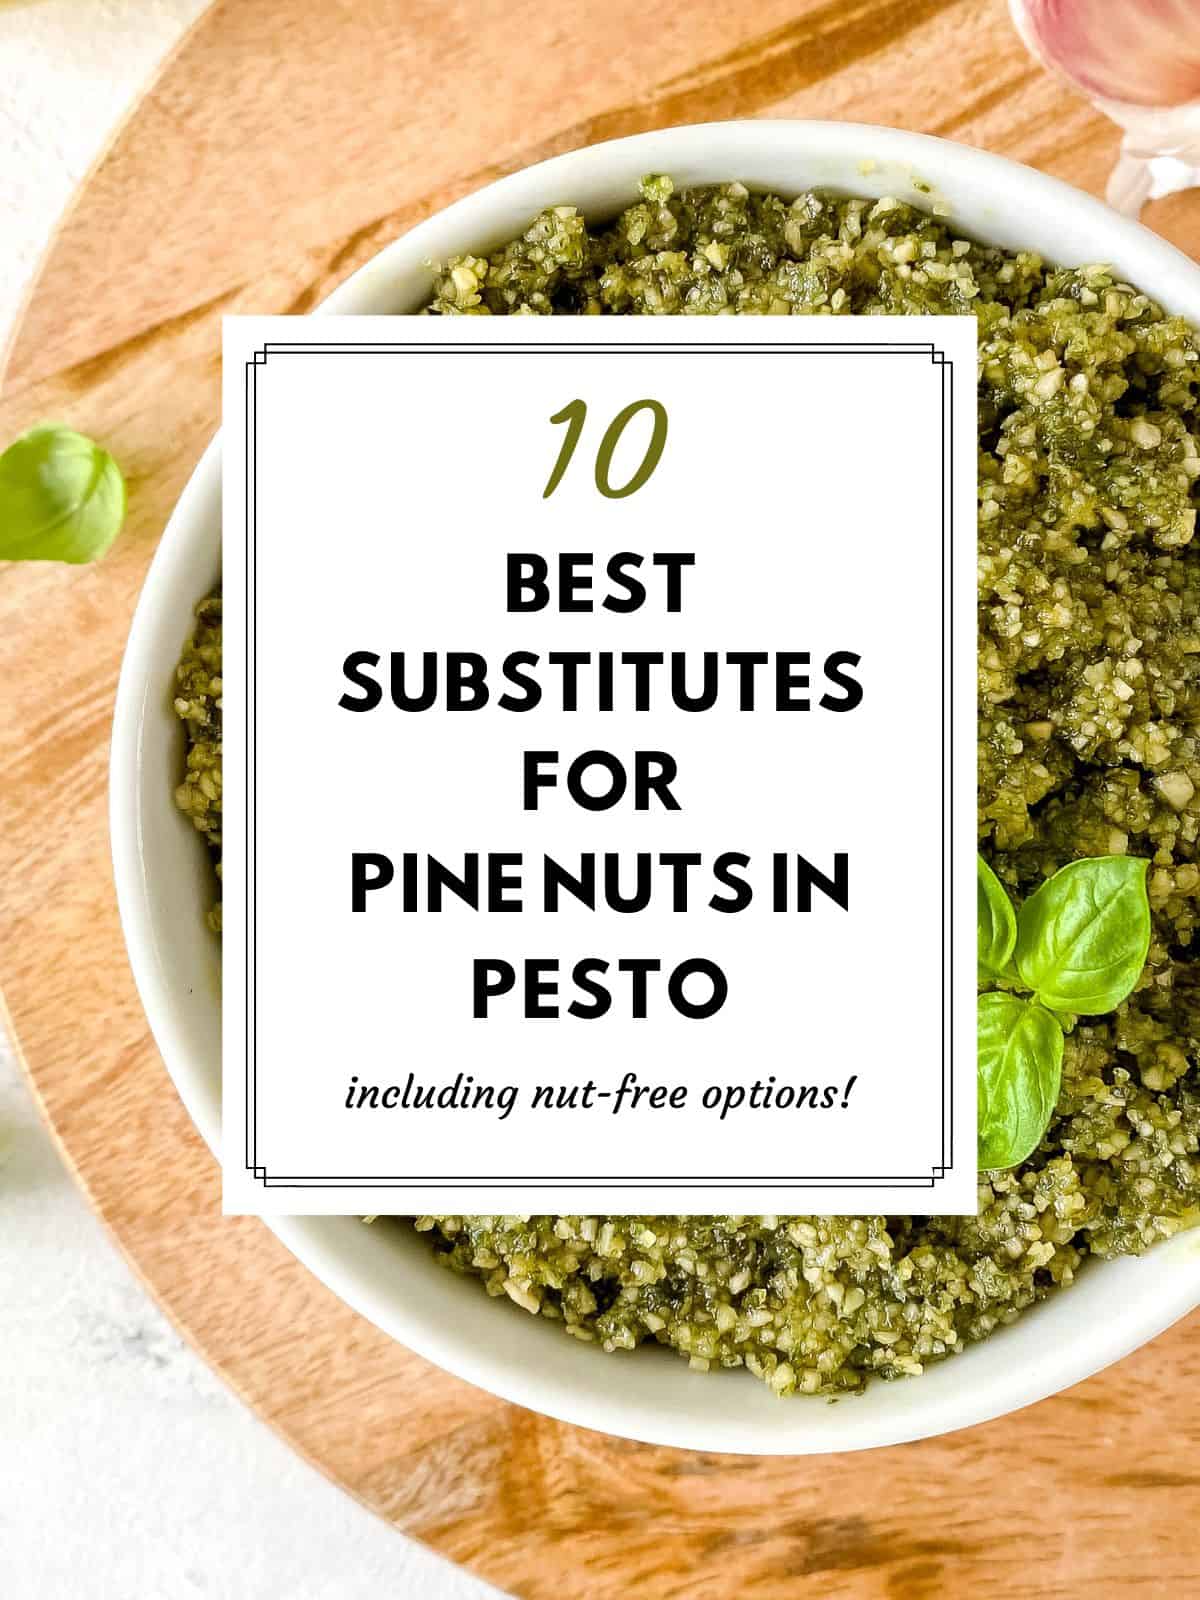 bowl of pesto on a wooden board with text ten best substitutes for pine nuts in pesto including nut free options.